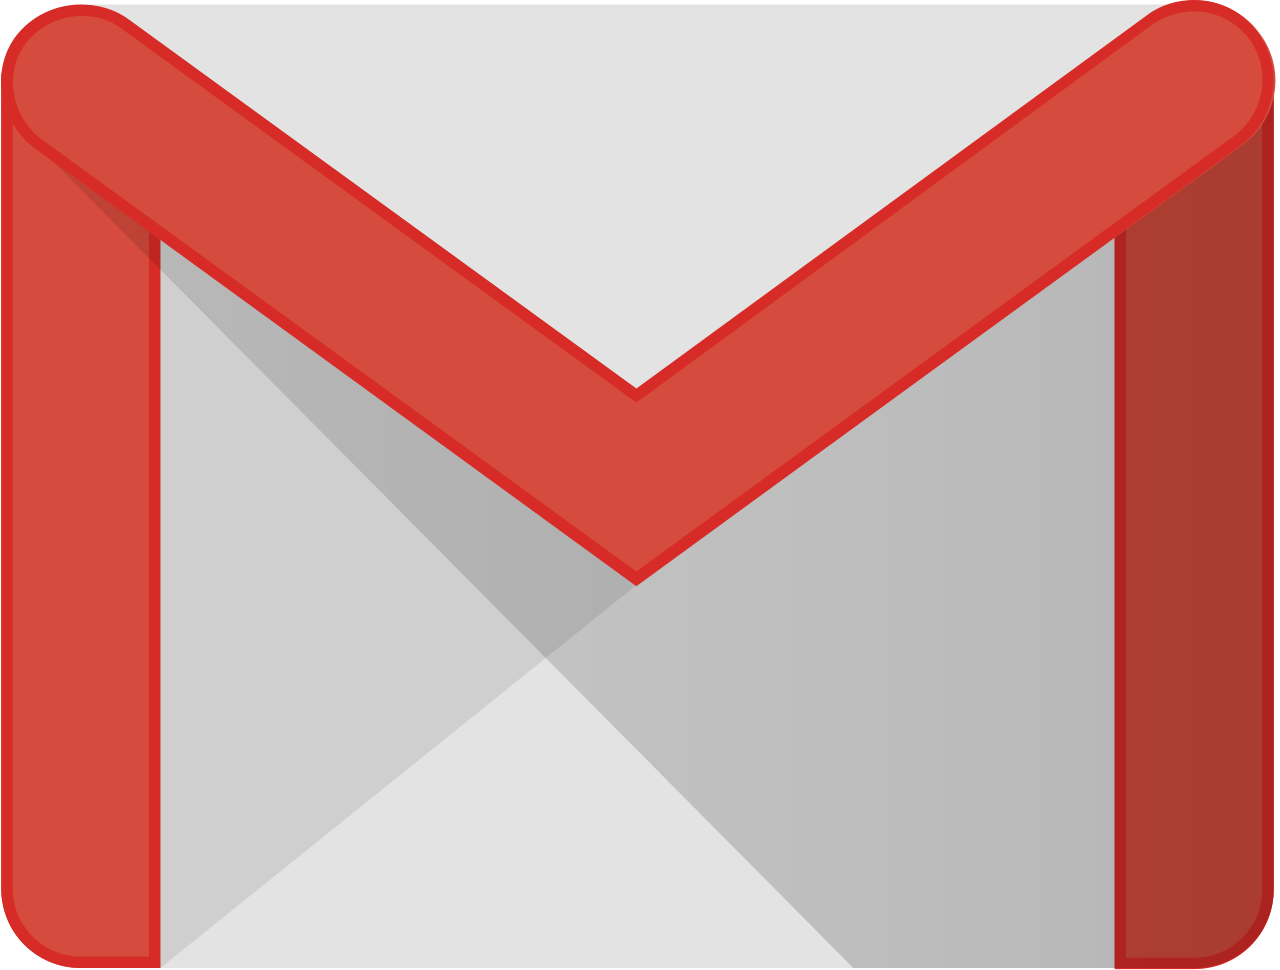 a warped gmail logo which is an envelope icon with red edges